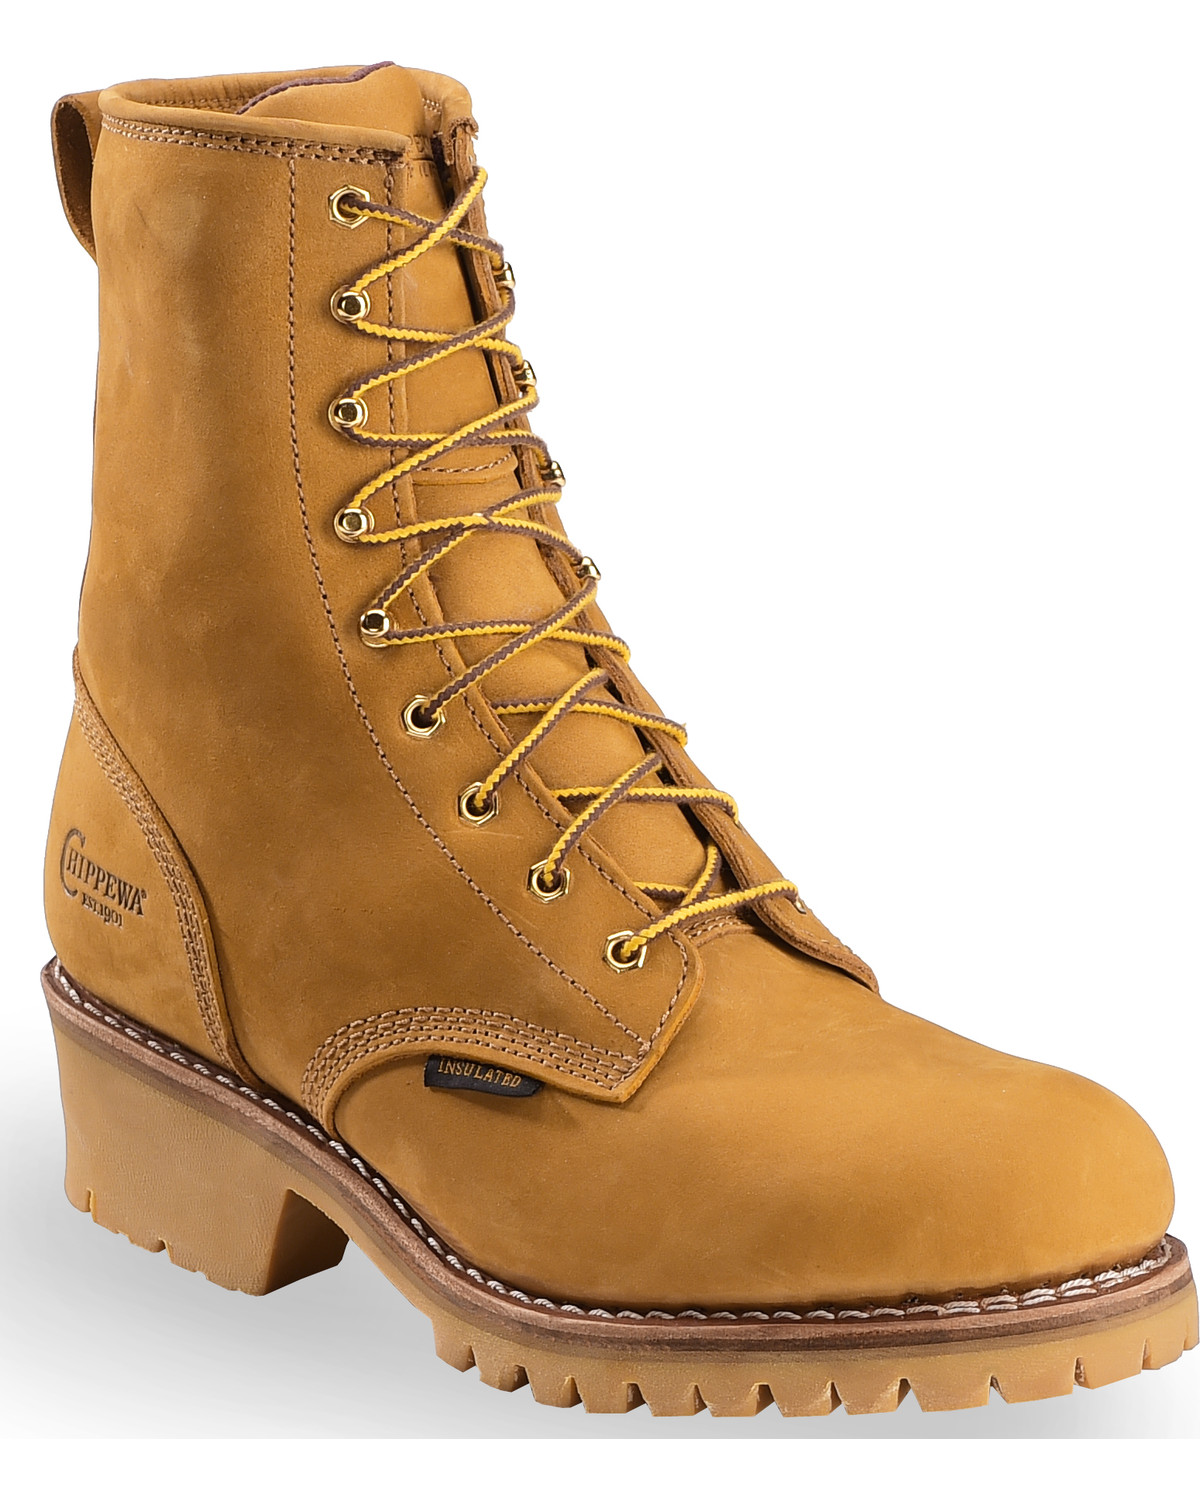 logger work boots